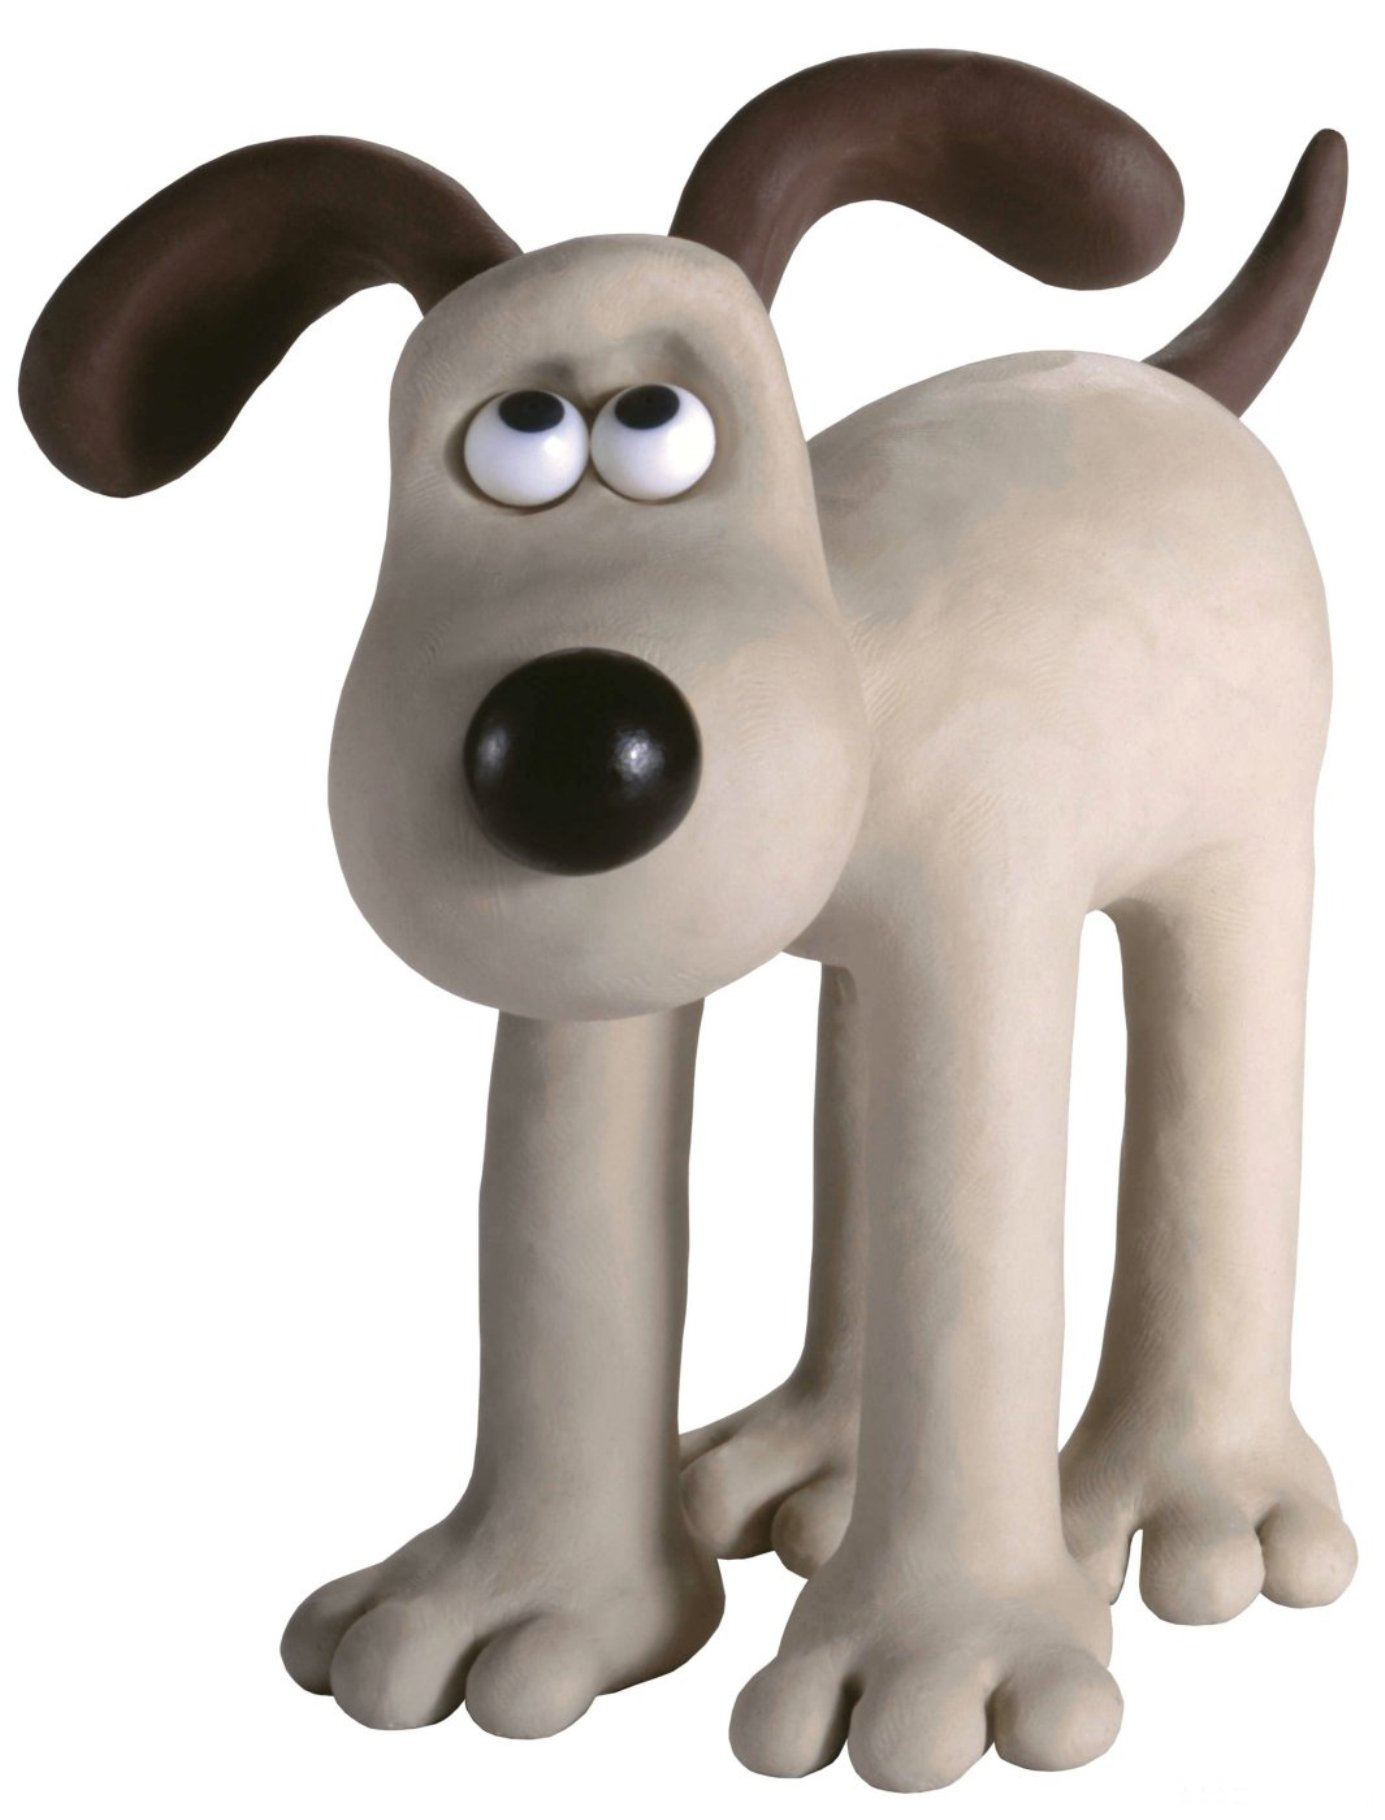 Wallace Gromit: The Curse of the Were-Rabbit 2005